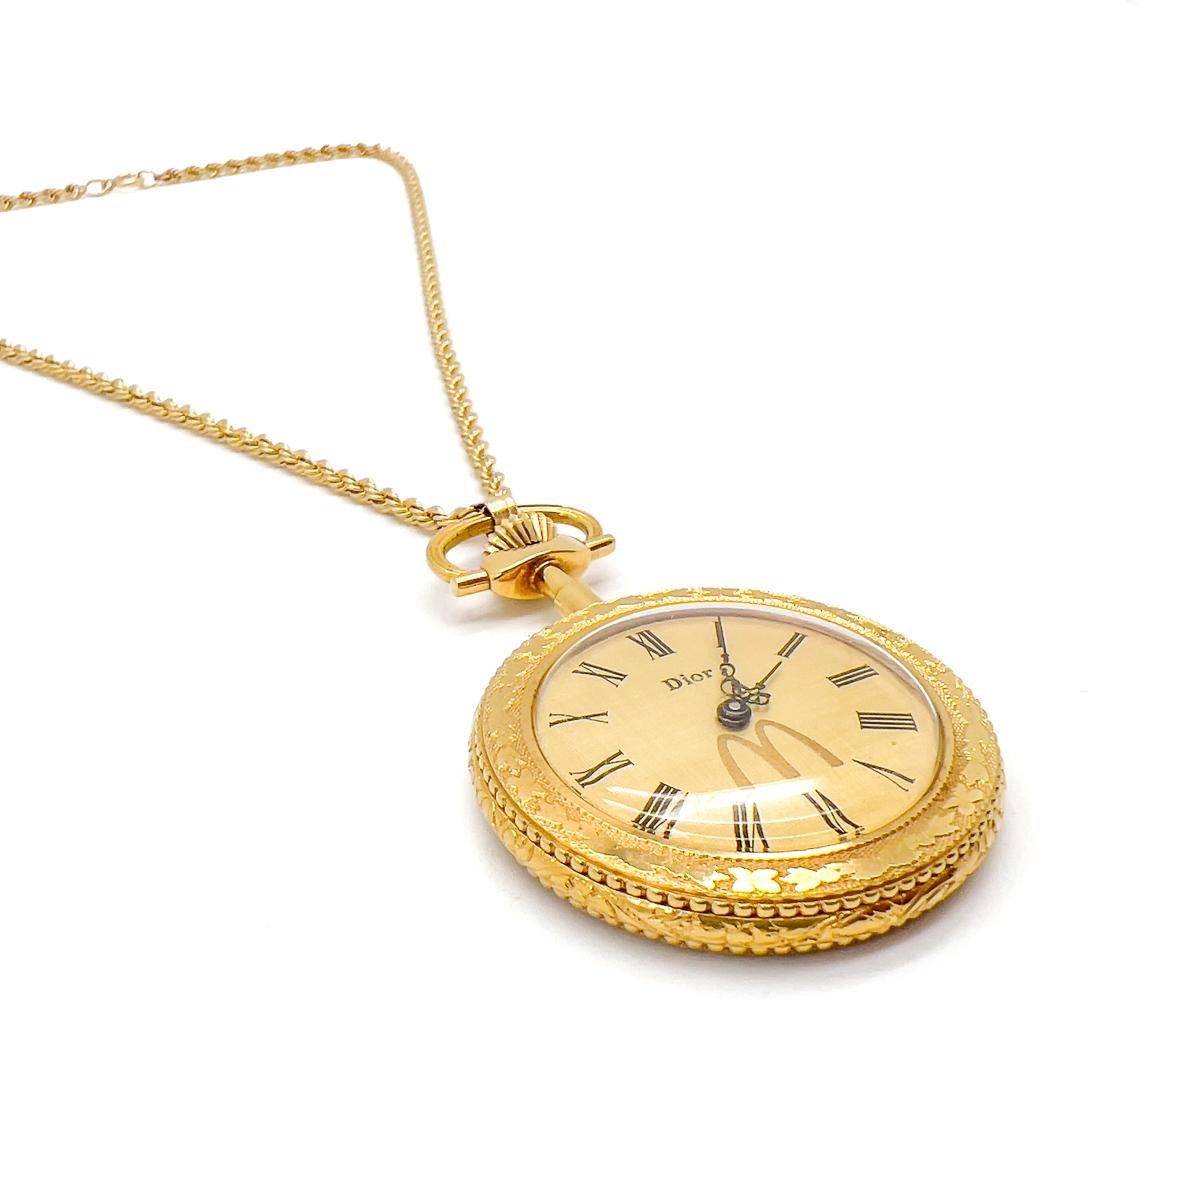 A Vintage Christian Dior Pendant Watch Necklace bearing the brands of both Dior and McDonalds. An almost incredulous brand pairing of fast-food and fashion megabrands, McDonalds & Dior. So much so, it's novelty value and intriguing provenance drew